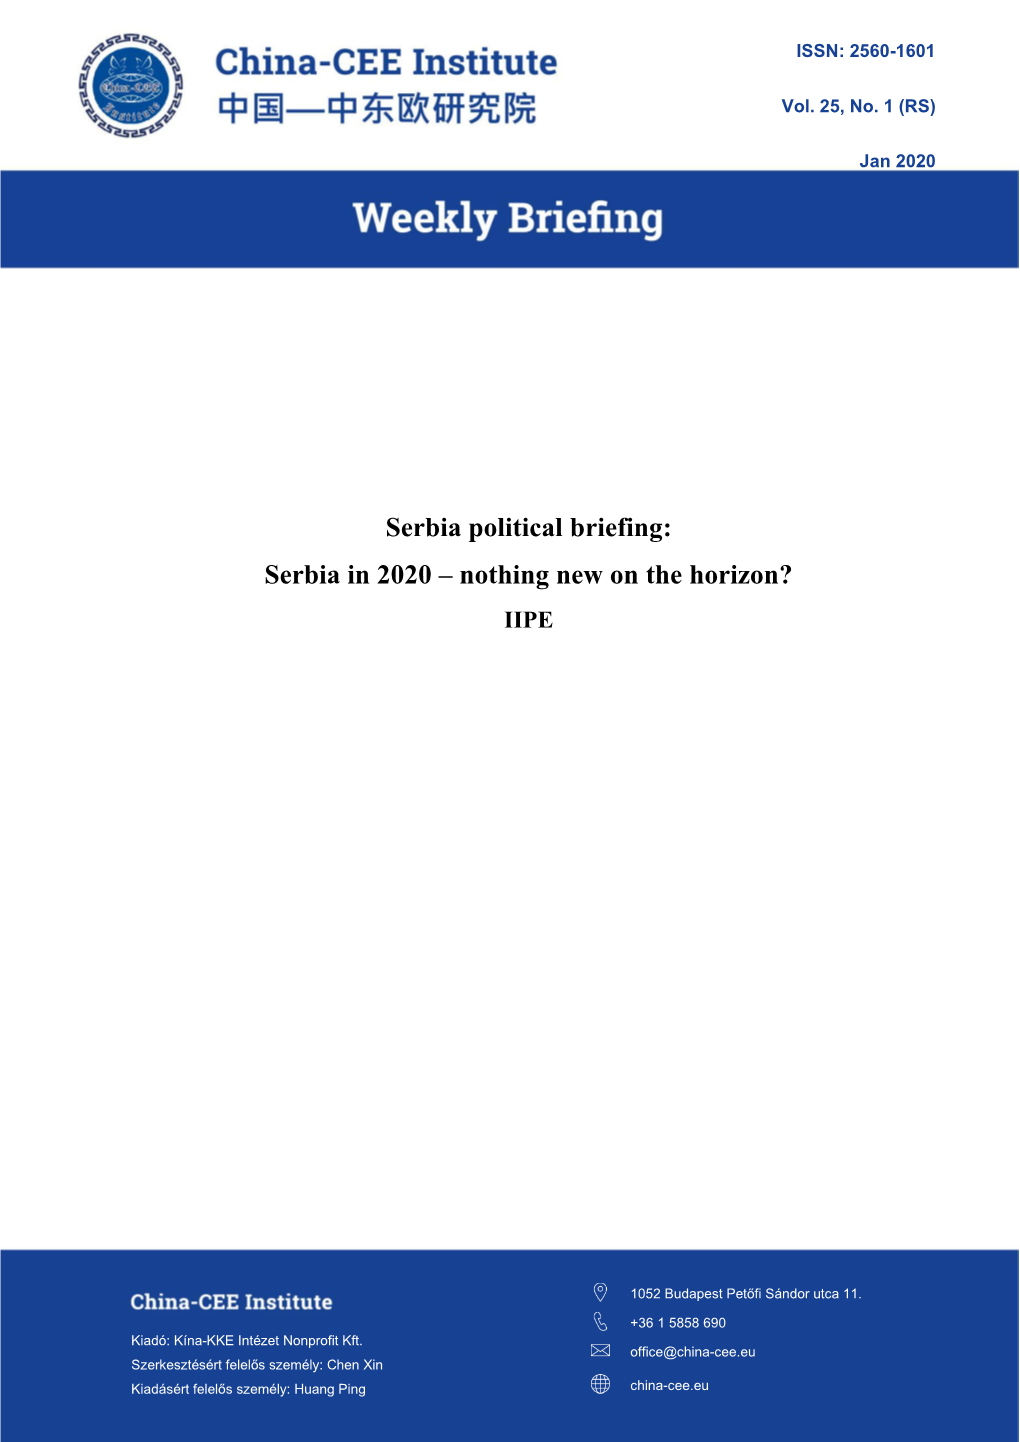 Serbia Political Briefing: Serbia in 2020 – Nothing New on the Horizon? IIPE